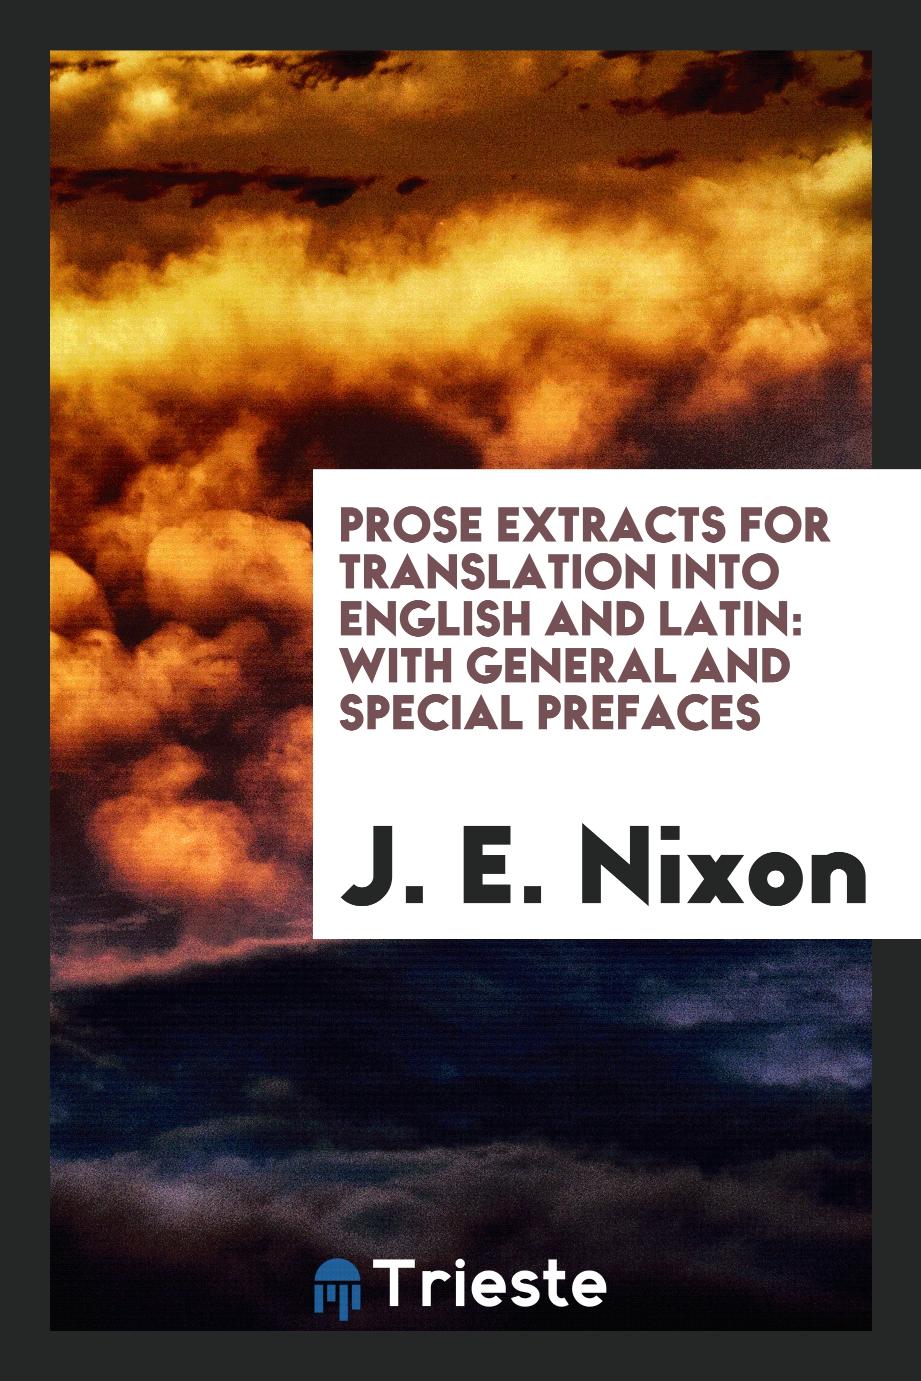 Prose Extracts for Translation Into English and Latin: With General and Special Prefaces